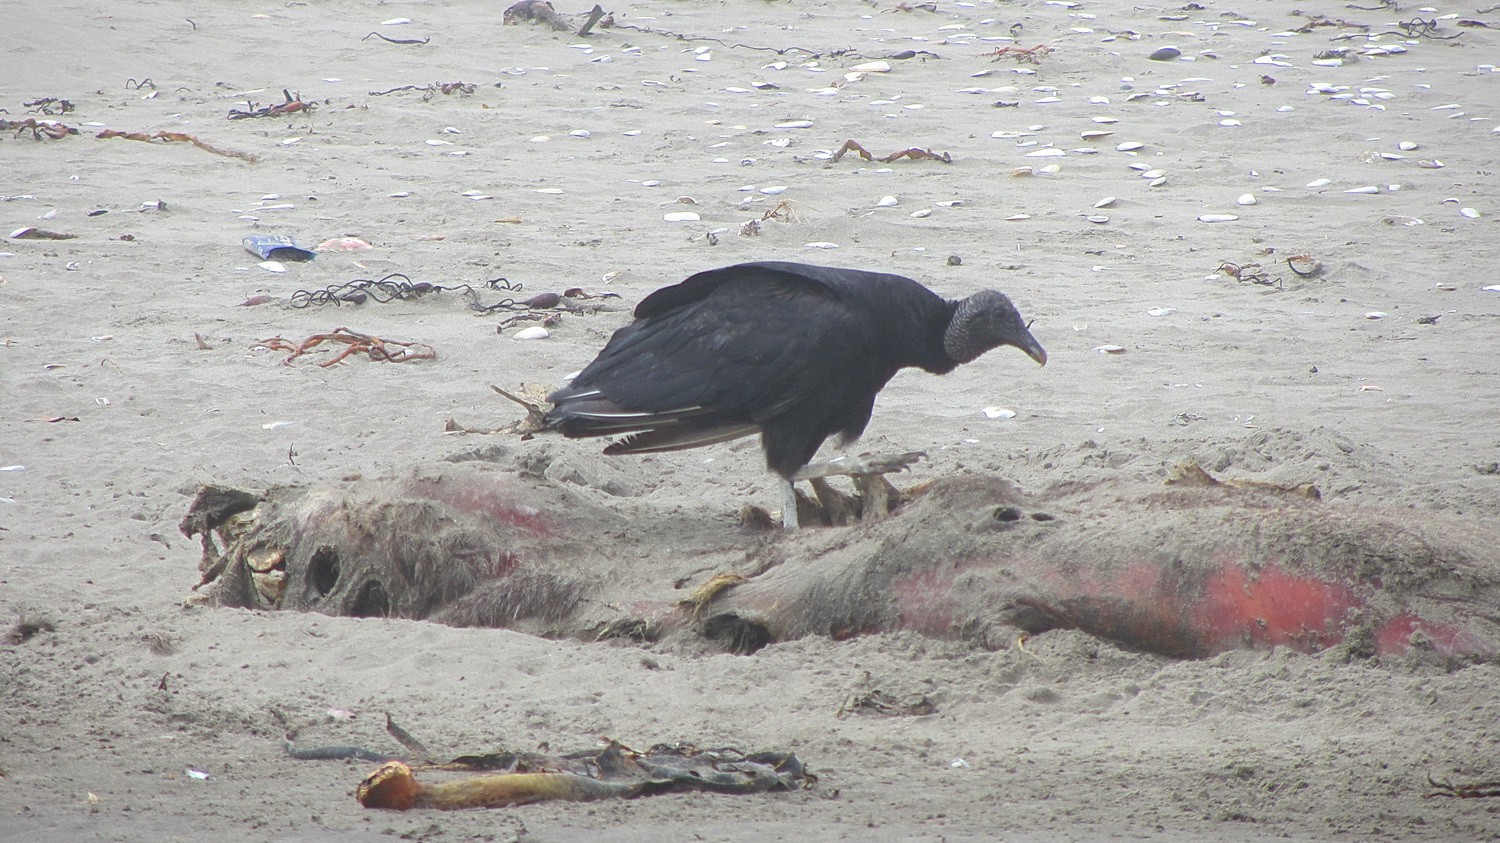 Vulture on the beach